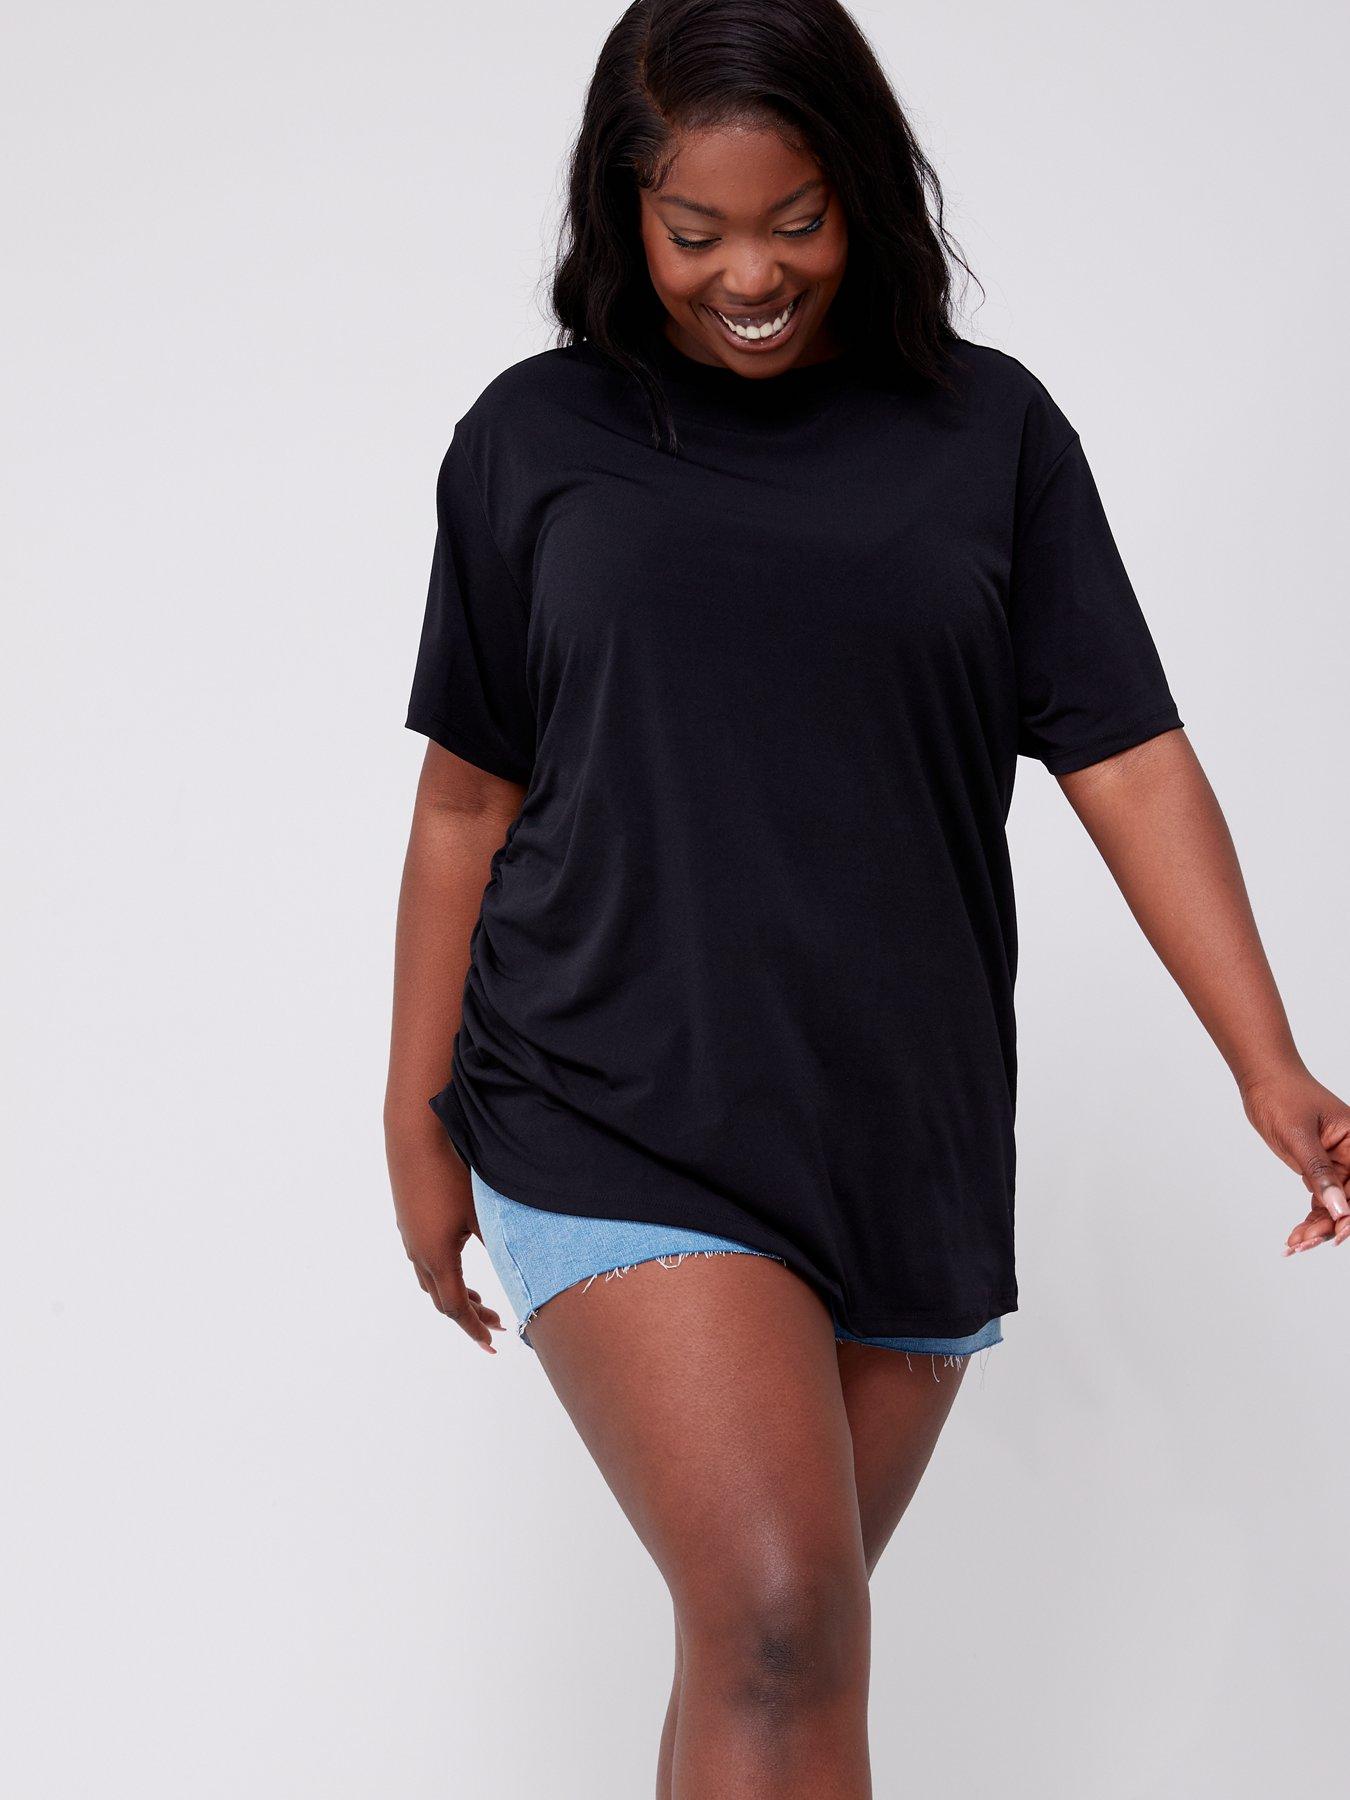 Plus Size Tops | Plus Size Evening Tops for Women |